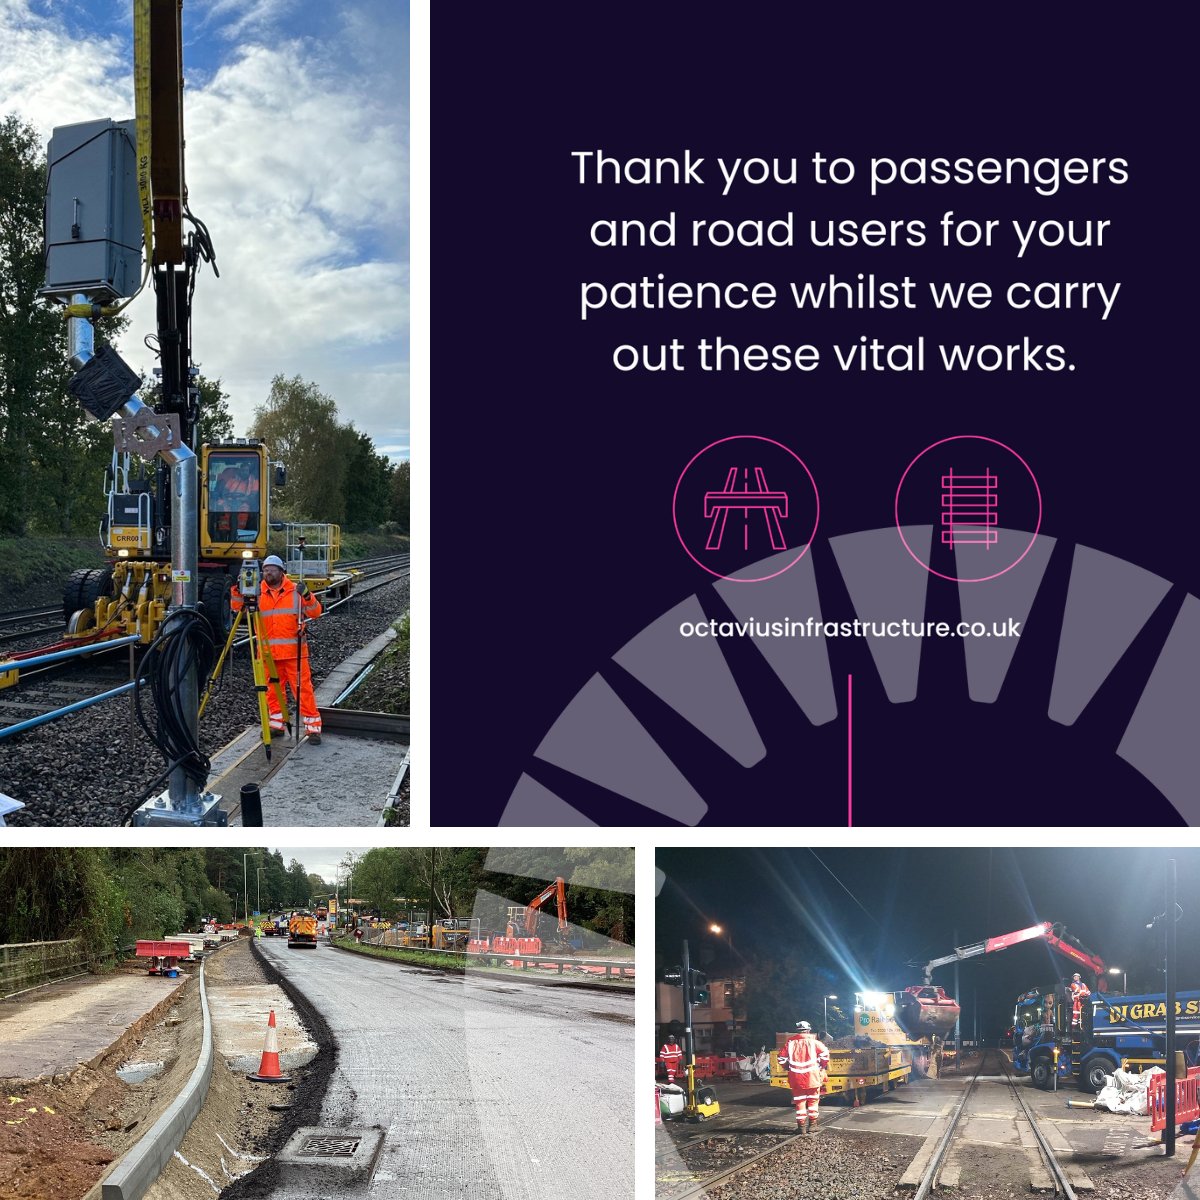 We’ve begun three major line closures to help improve the transport network. We're preparing the Guildford to Petersfield  line for modern signalling systems, drainage works along the Sandilands tram line & reconstruction works at Clophill roundabout

#BringingPeopleTogether